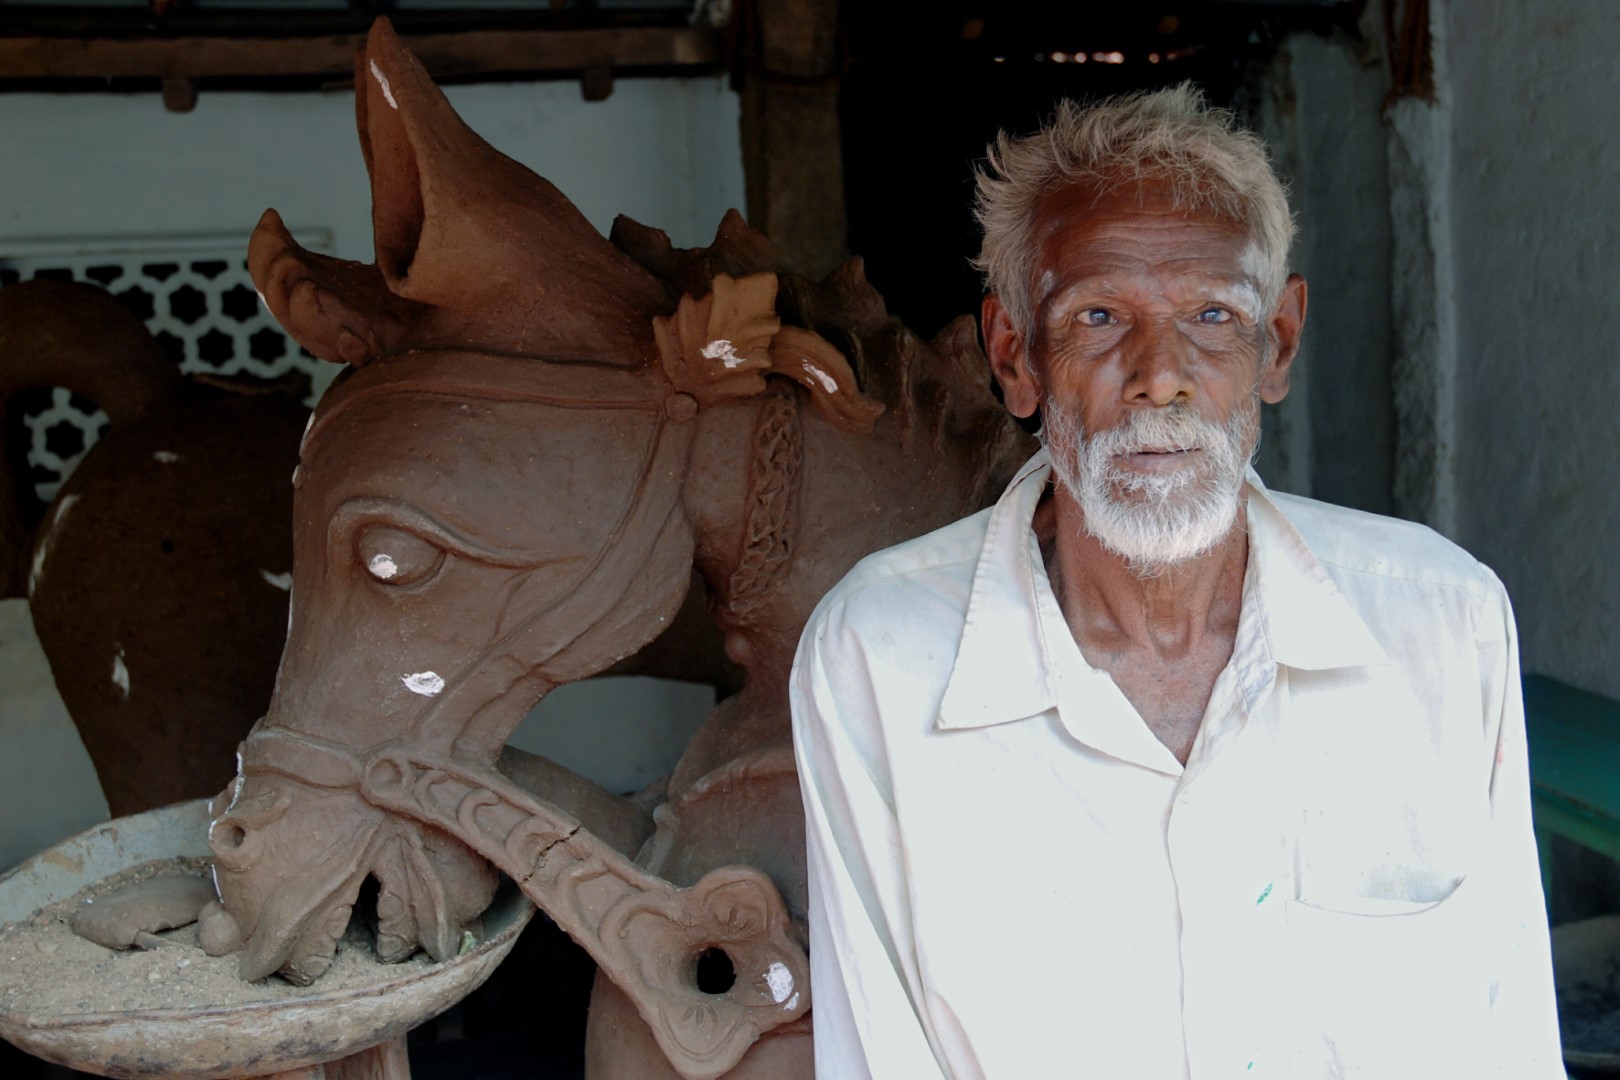 <span style="font-weight:normal;">An old potter sitting beside the horse's head he has created. To keep it steady while it is drying, the head is balanced in a dish of sand.</span>